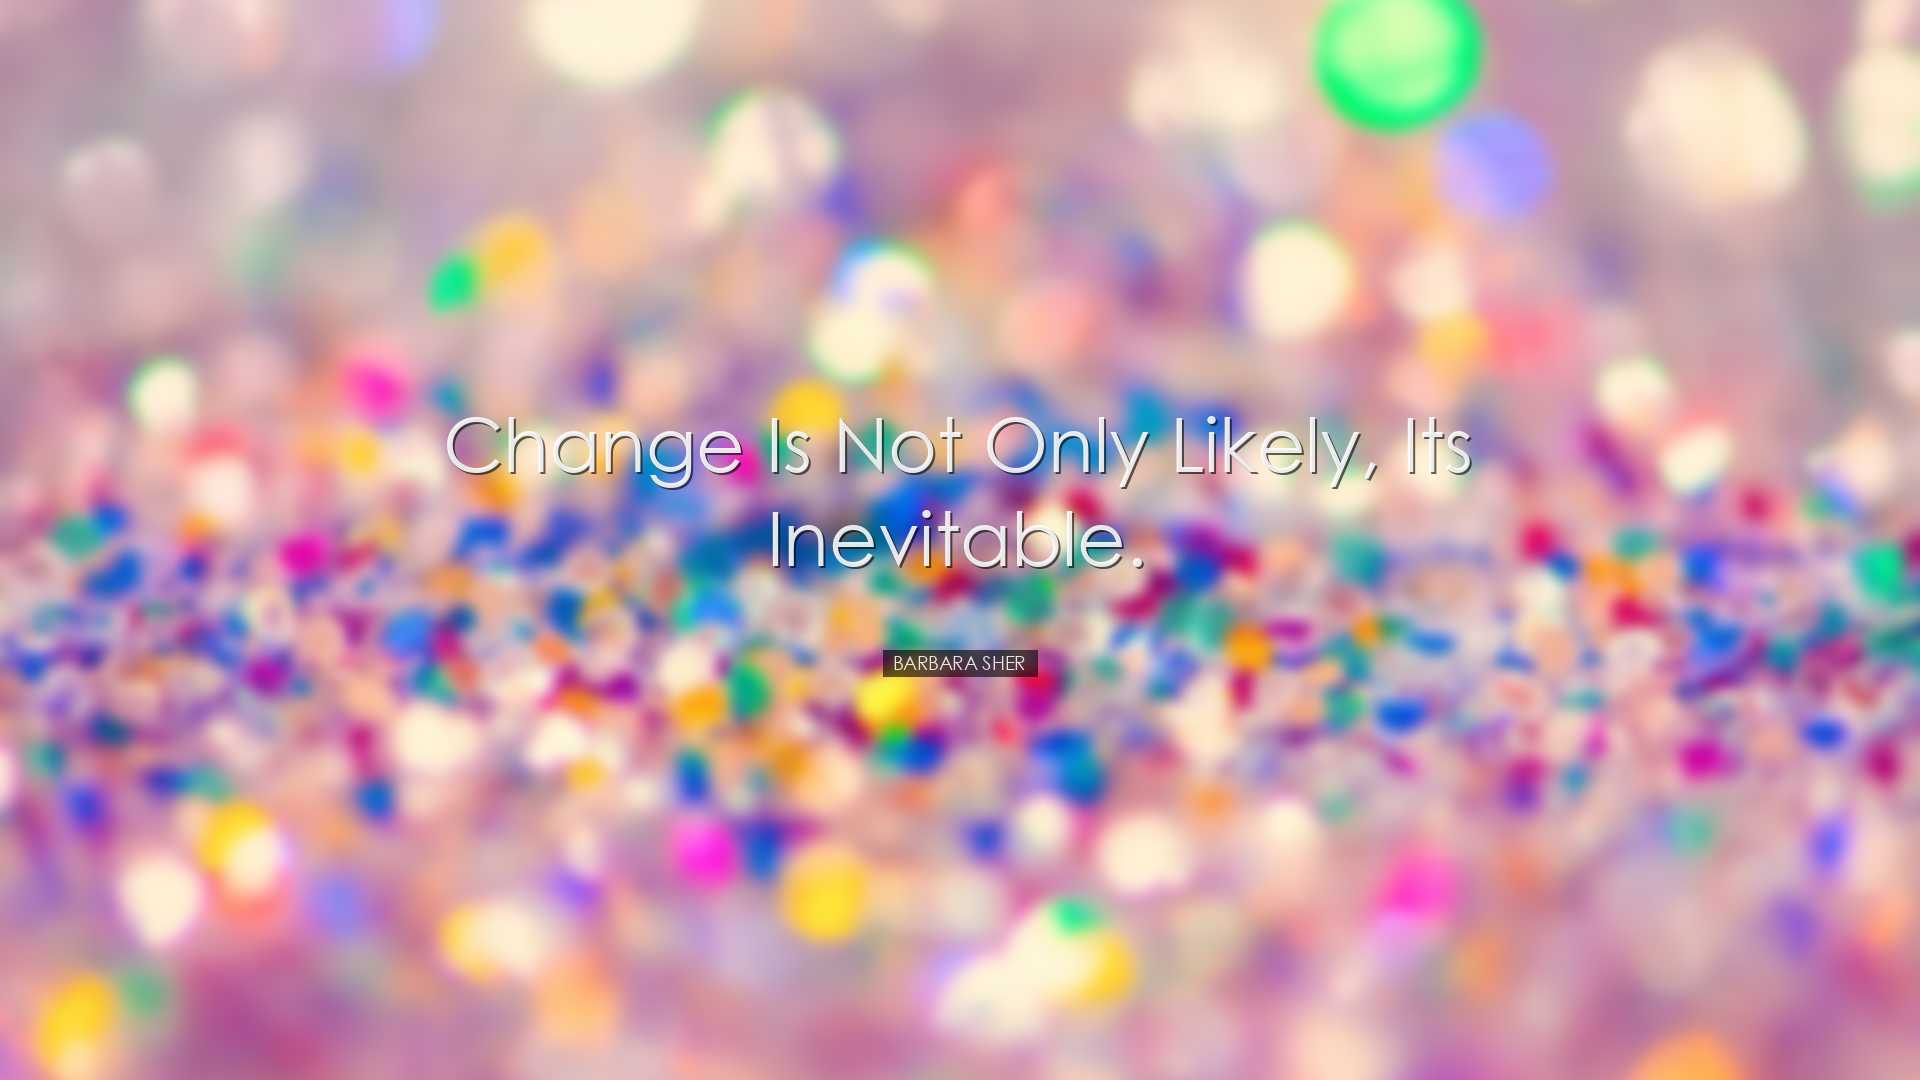 Change is not only likely, its inevitable. - Barbara Sher